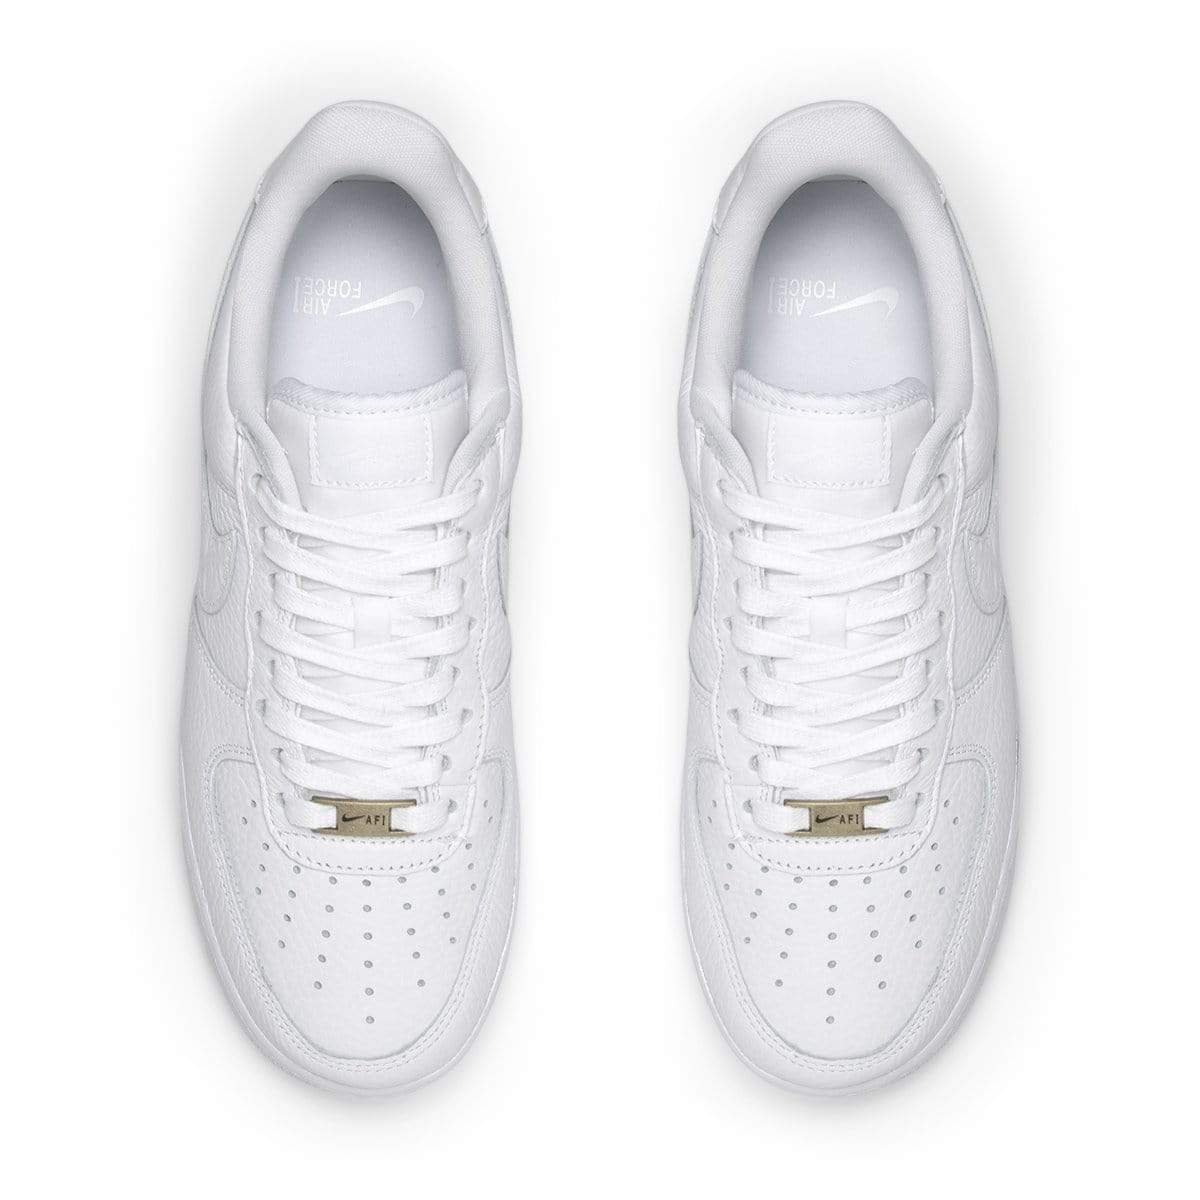 Nike Shoes AIR FORCE 1 07 CRAFT